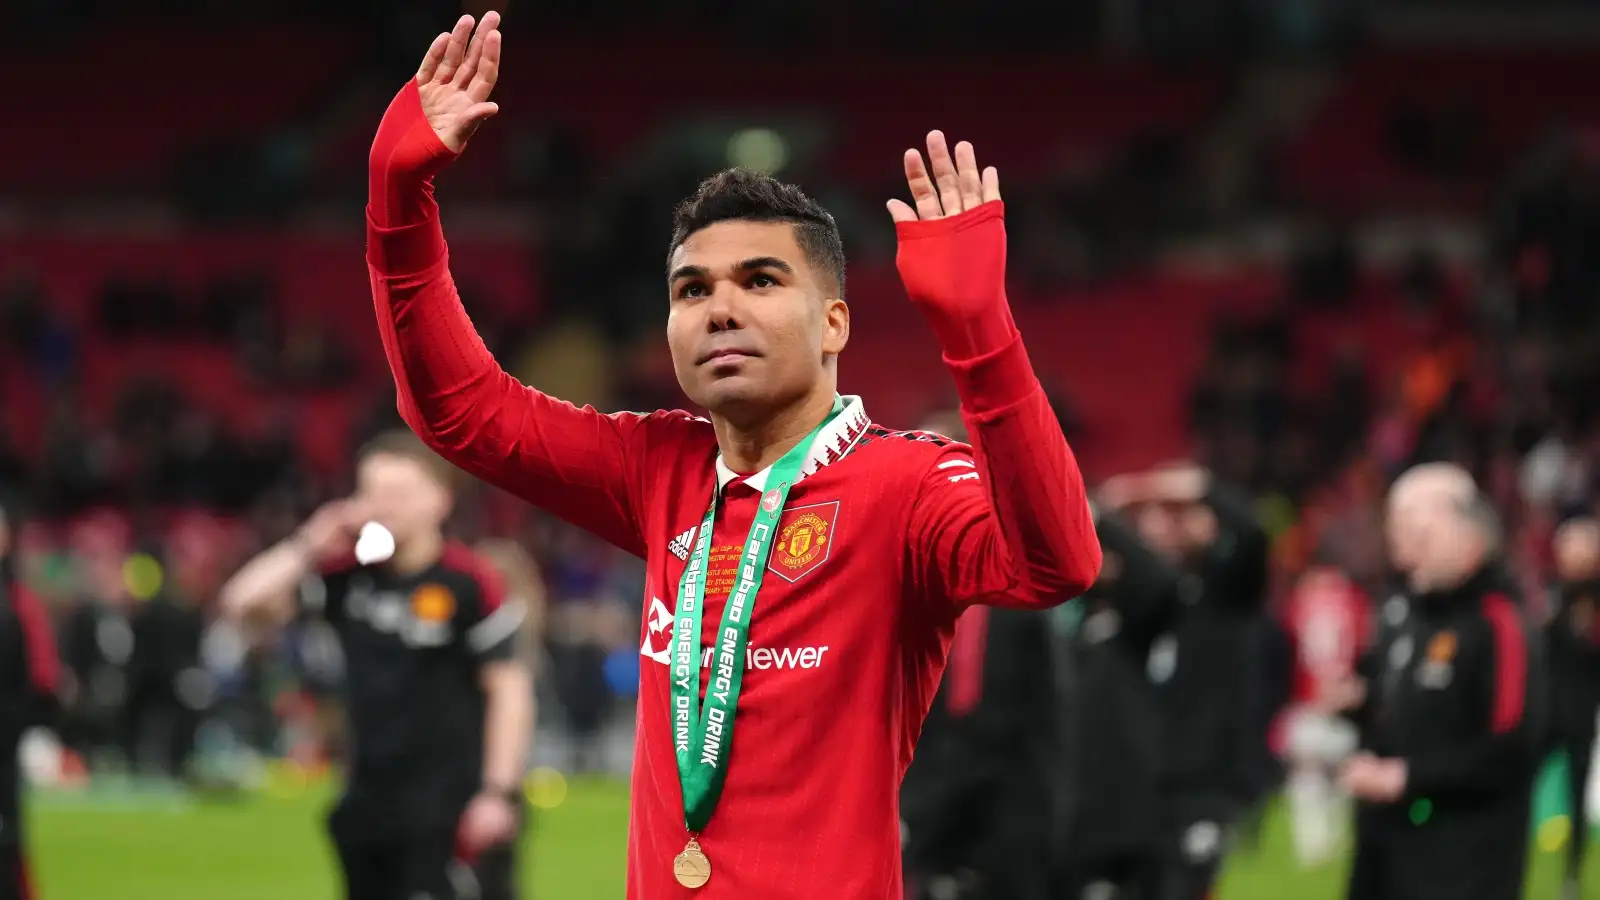 Casemiro’s post-match b*llocking of Bruno shows how Utd have changed